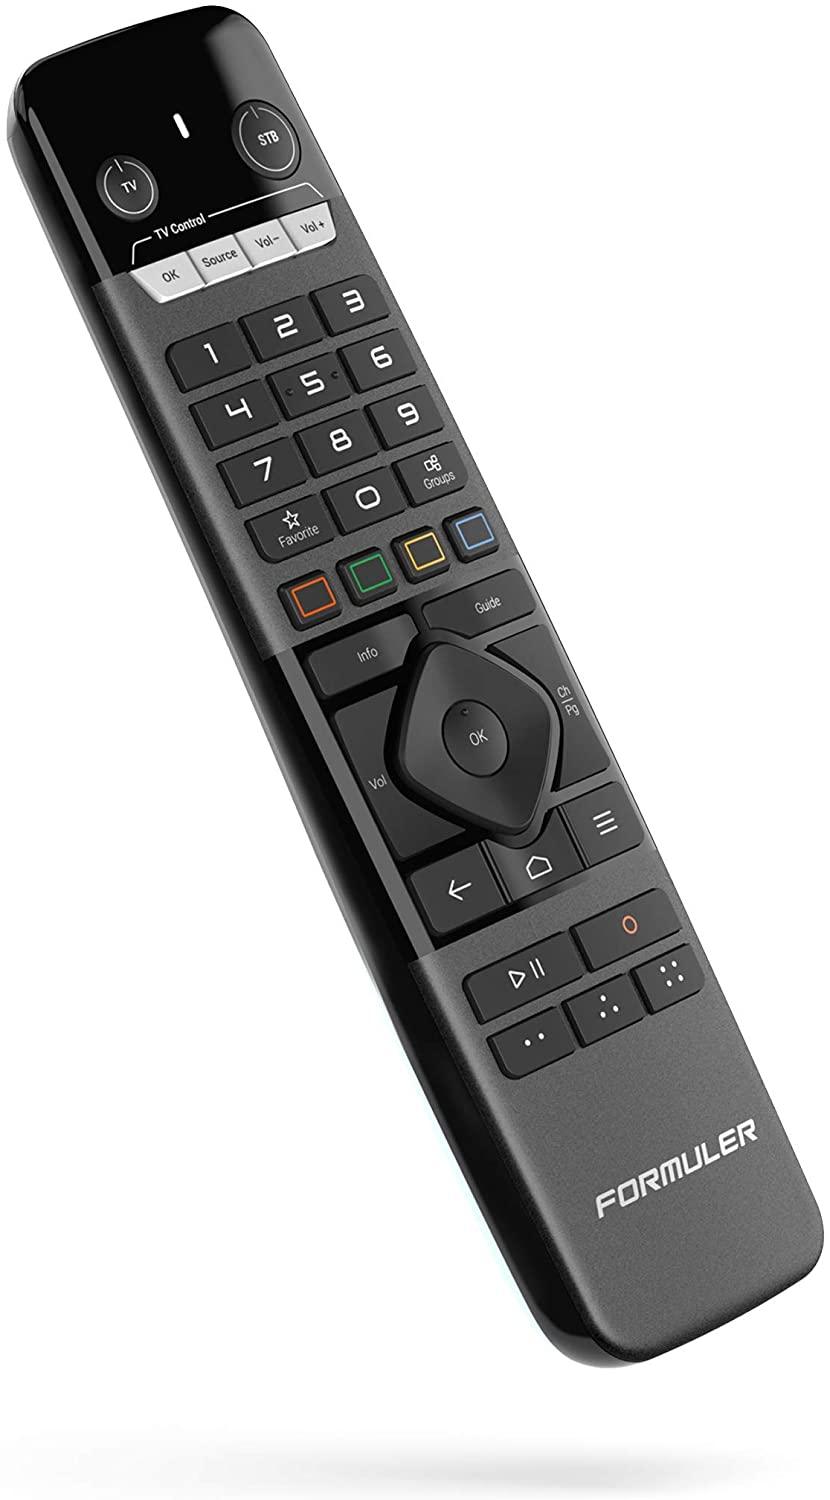 Formuler Replacement Remote